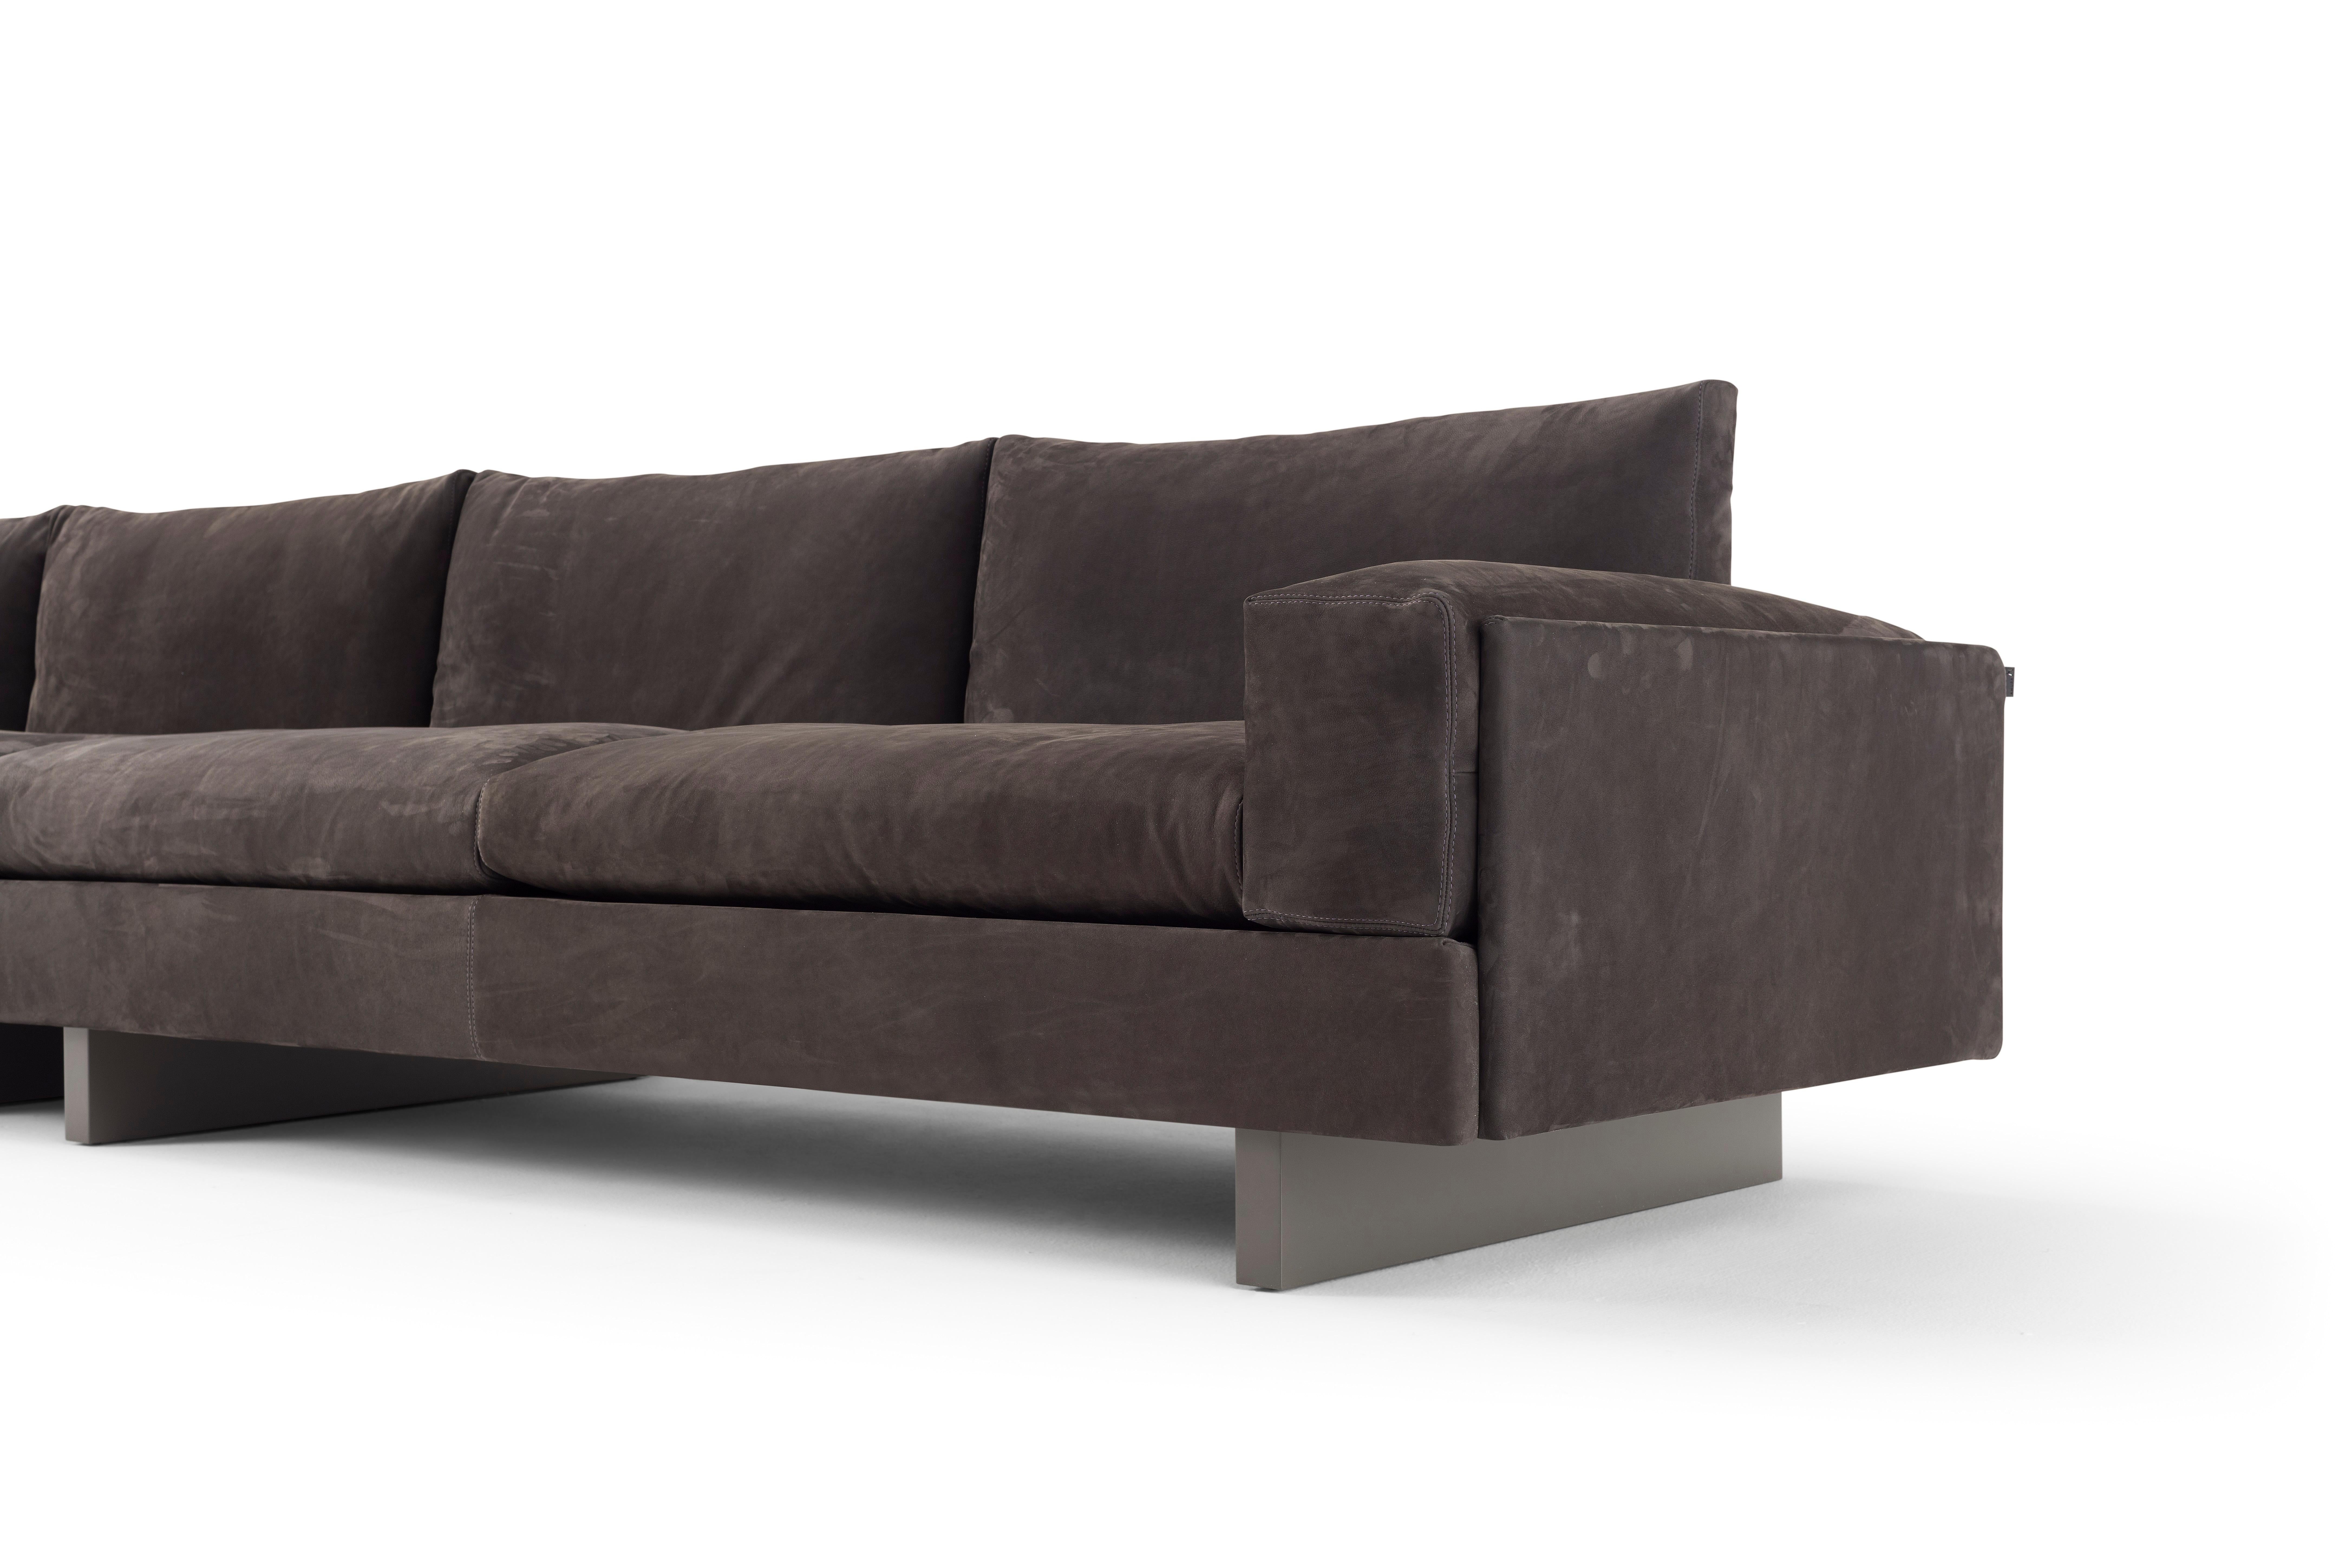 Hand-Crafted Amura 'Tau' Sofa in Brown Nabuk Leather by Emanuel Gargano For Sale